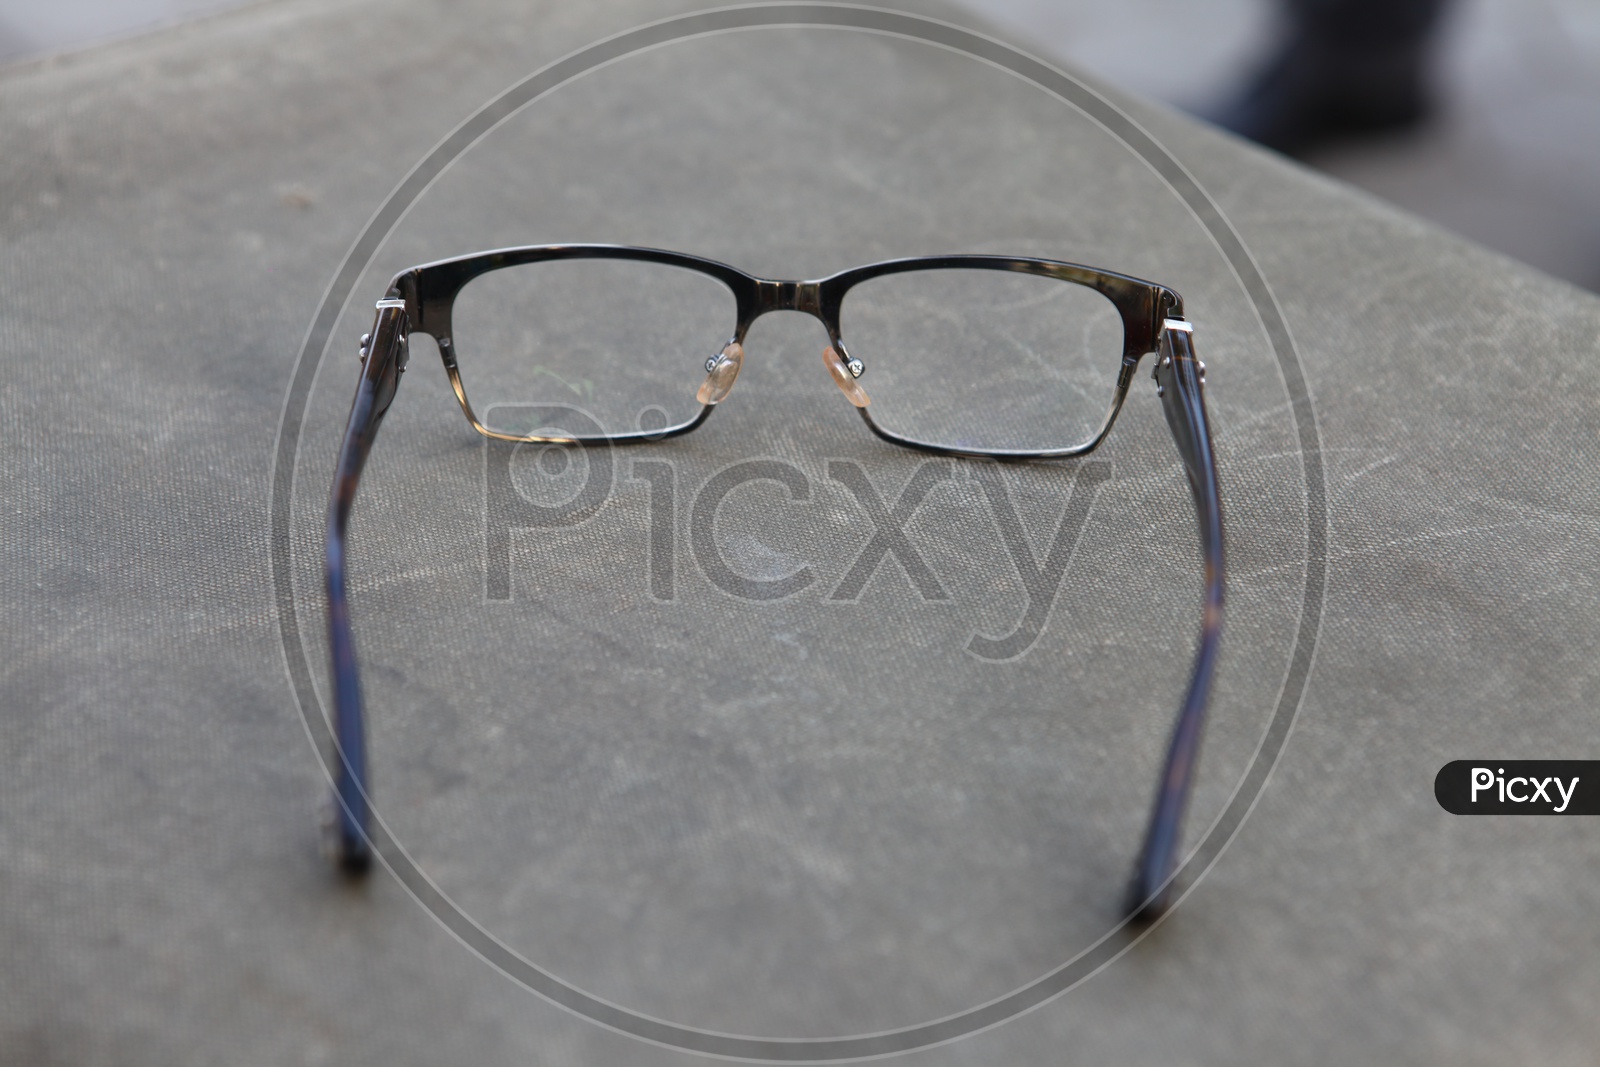 Spectacles glasses